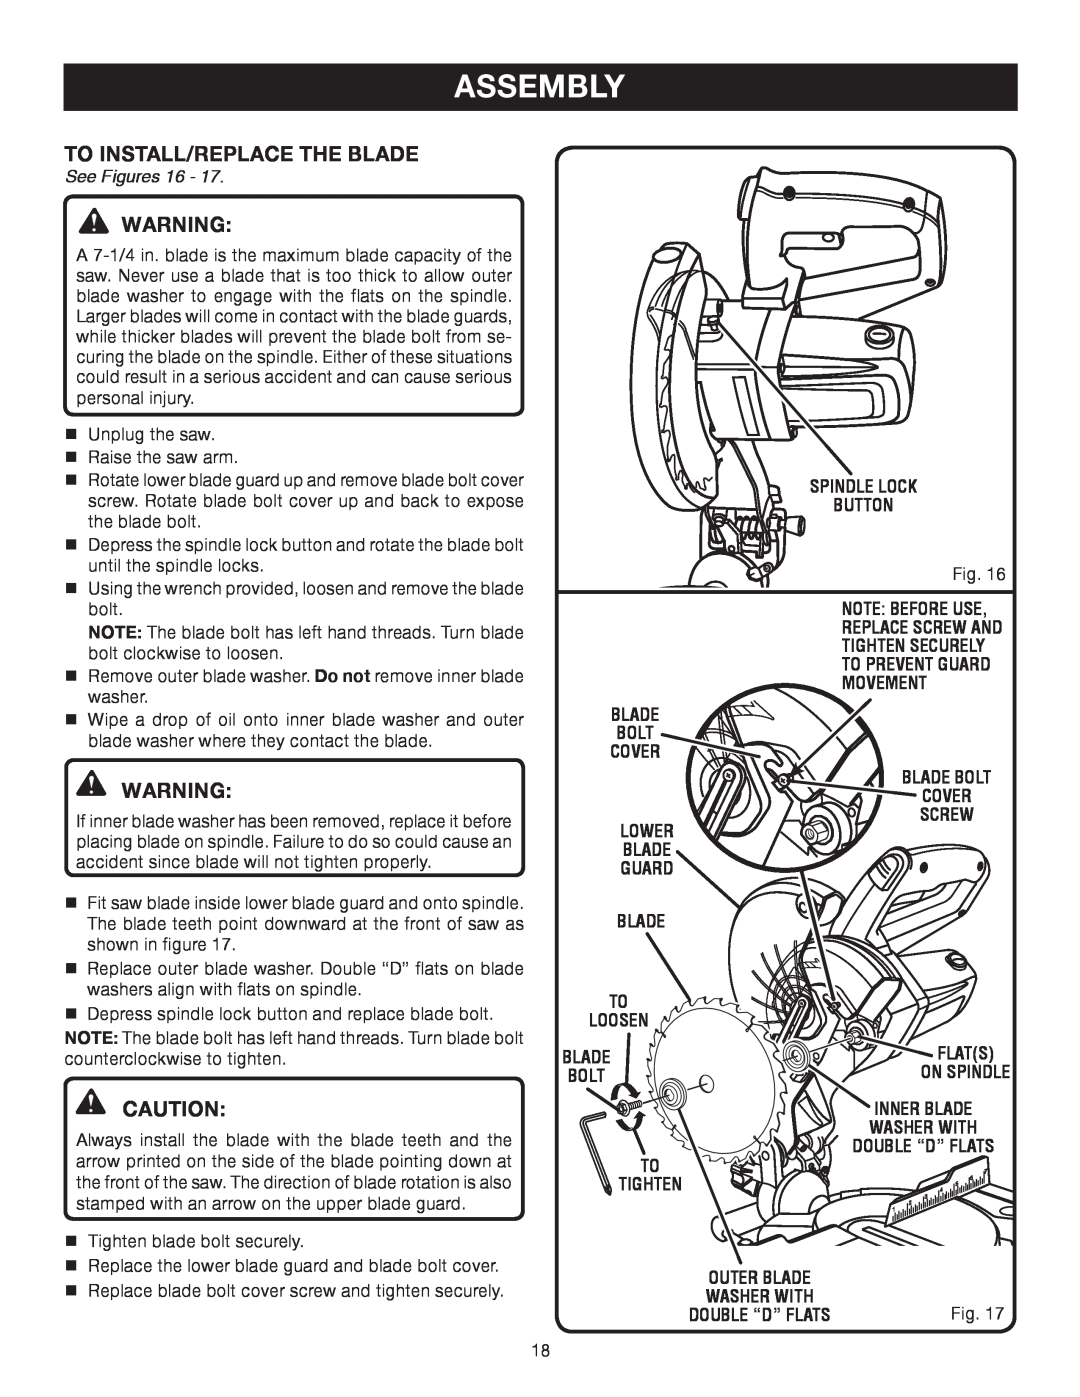 Ryobi TS1141 manual Assembly, To Install/replace the Blade, See Figures 16 